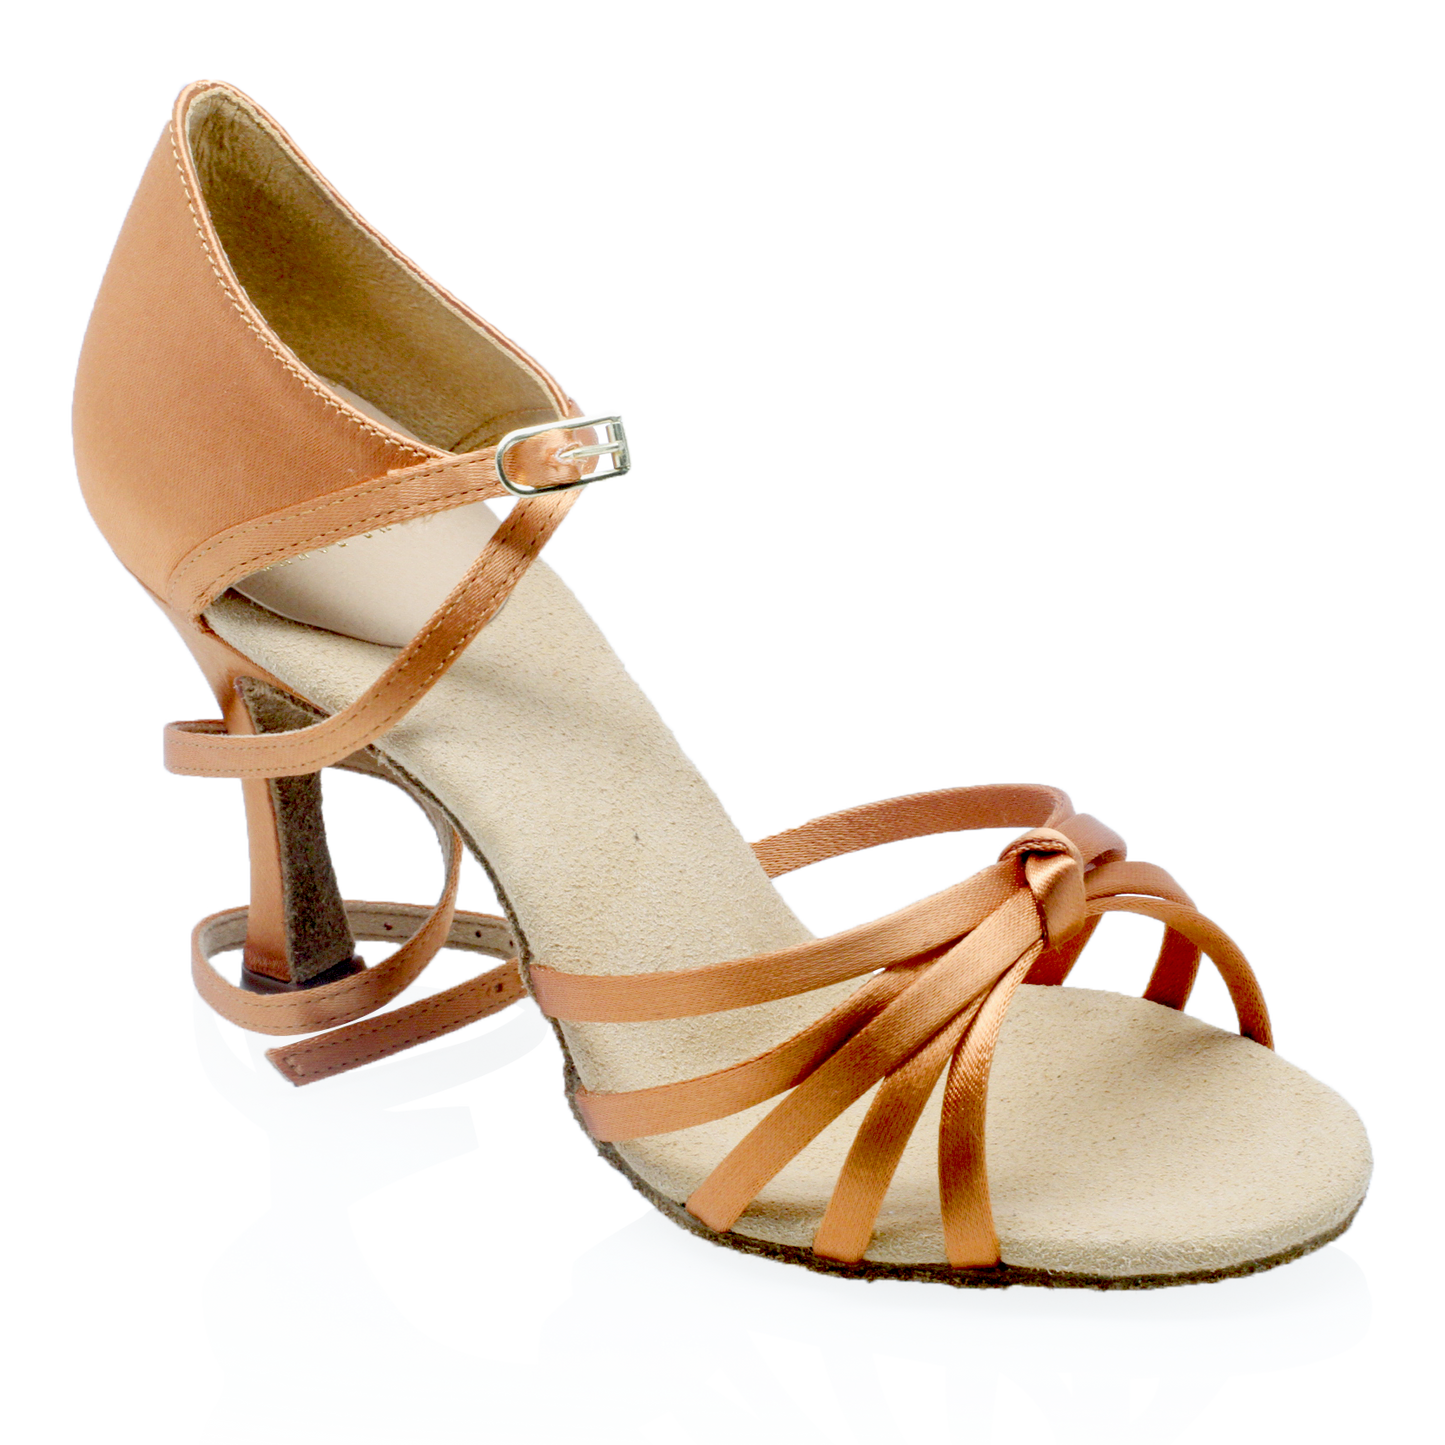 Women's Salsa Street Latin Dance Shoes by Ray Rose 825 Drizzle Light Tan Satin